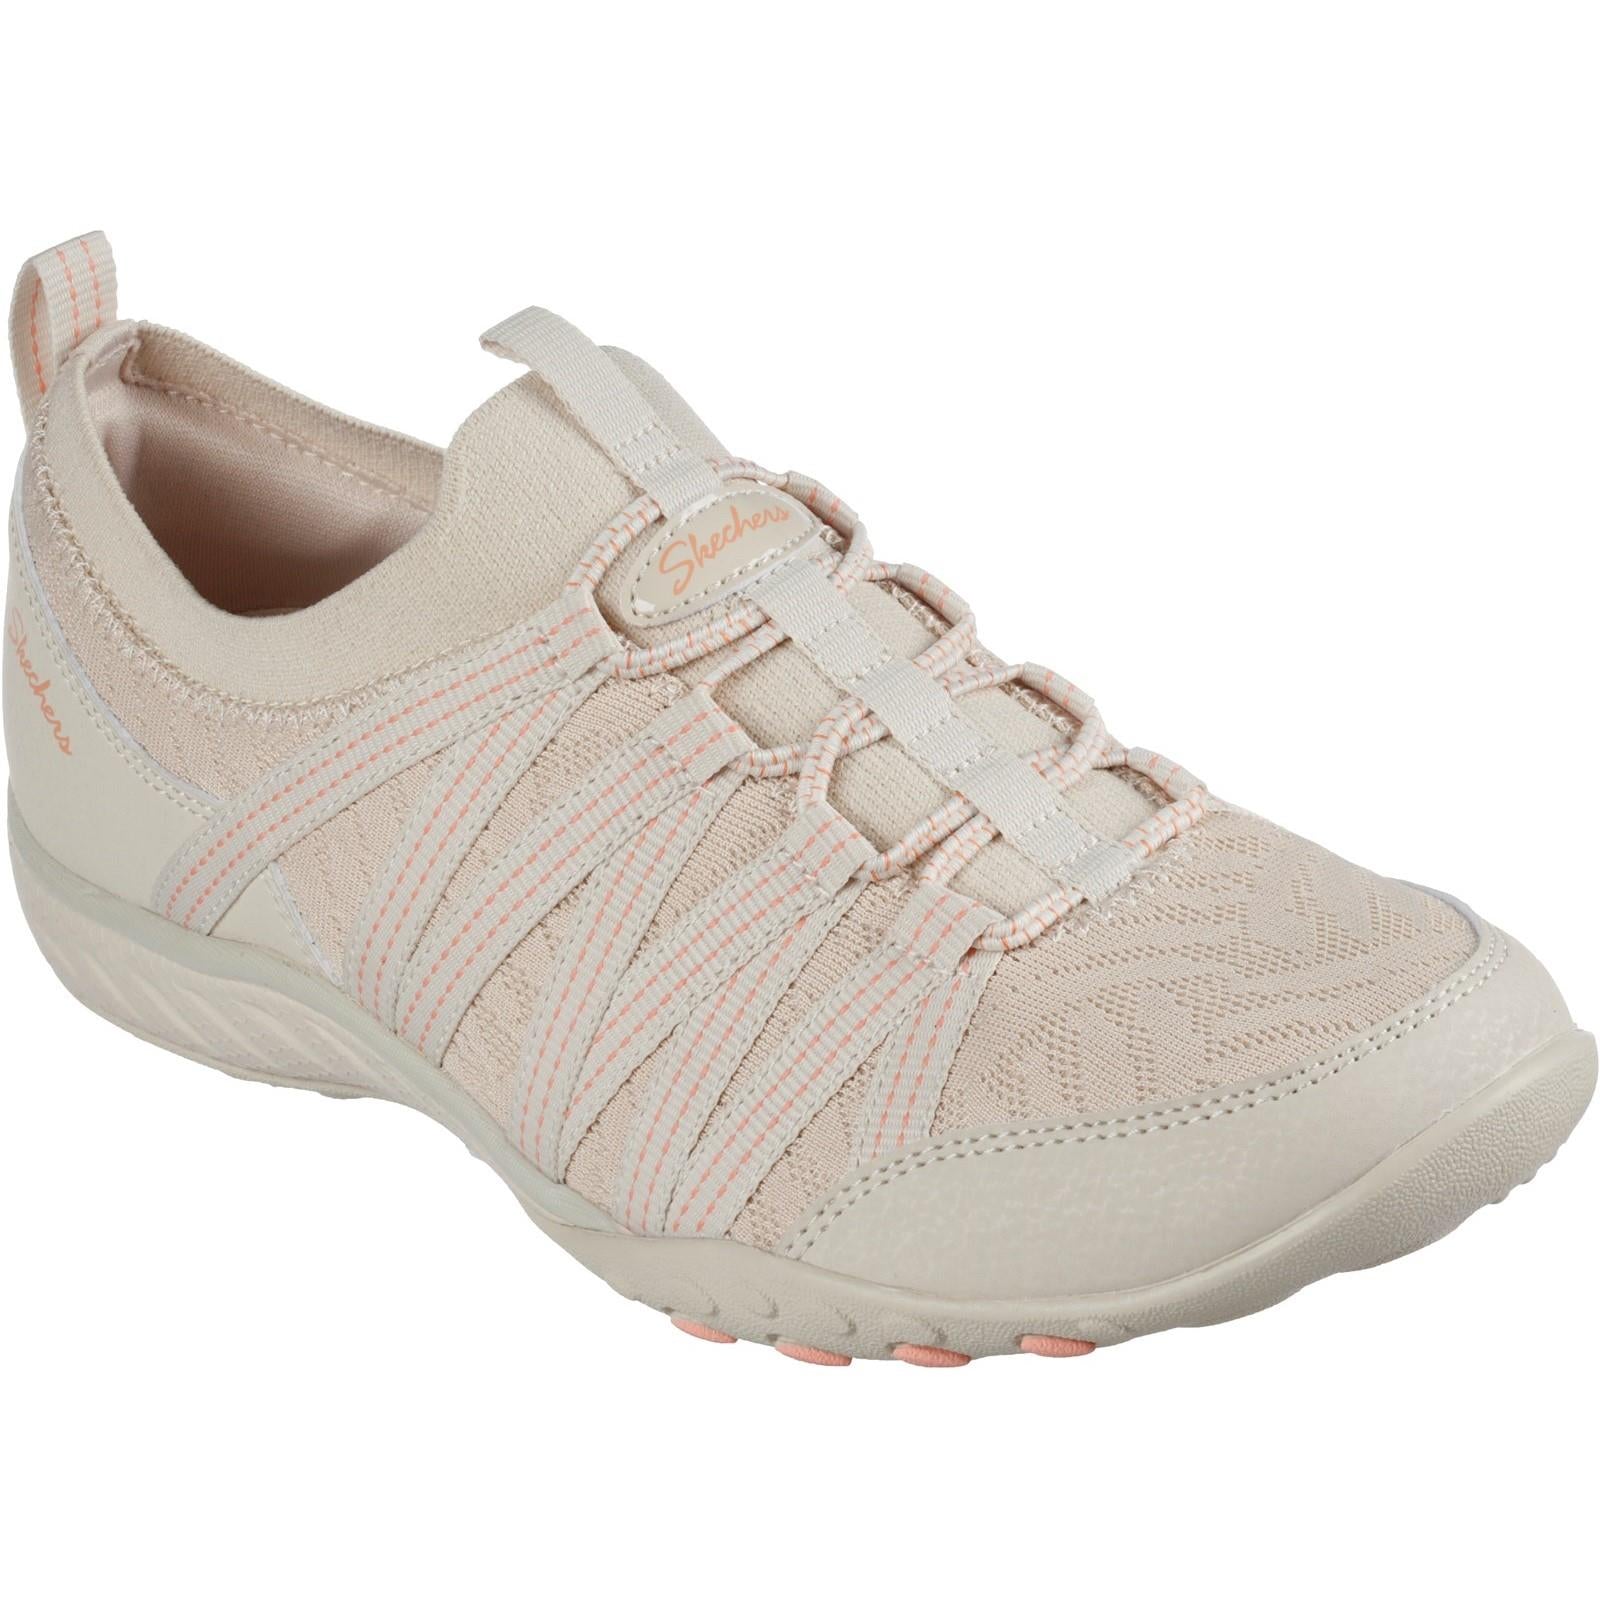 Skechers Breathe Easy First Light natural memory foam sports trainers shoes